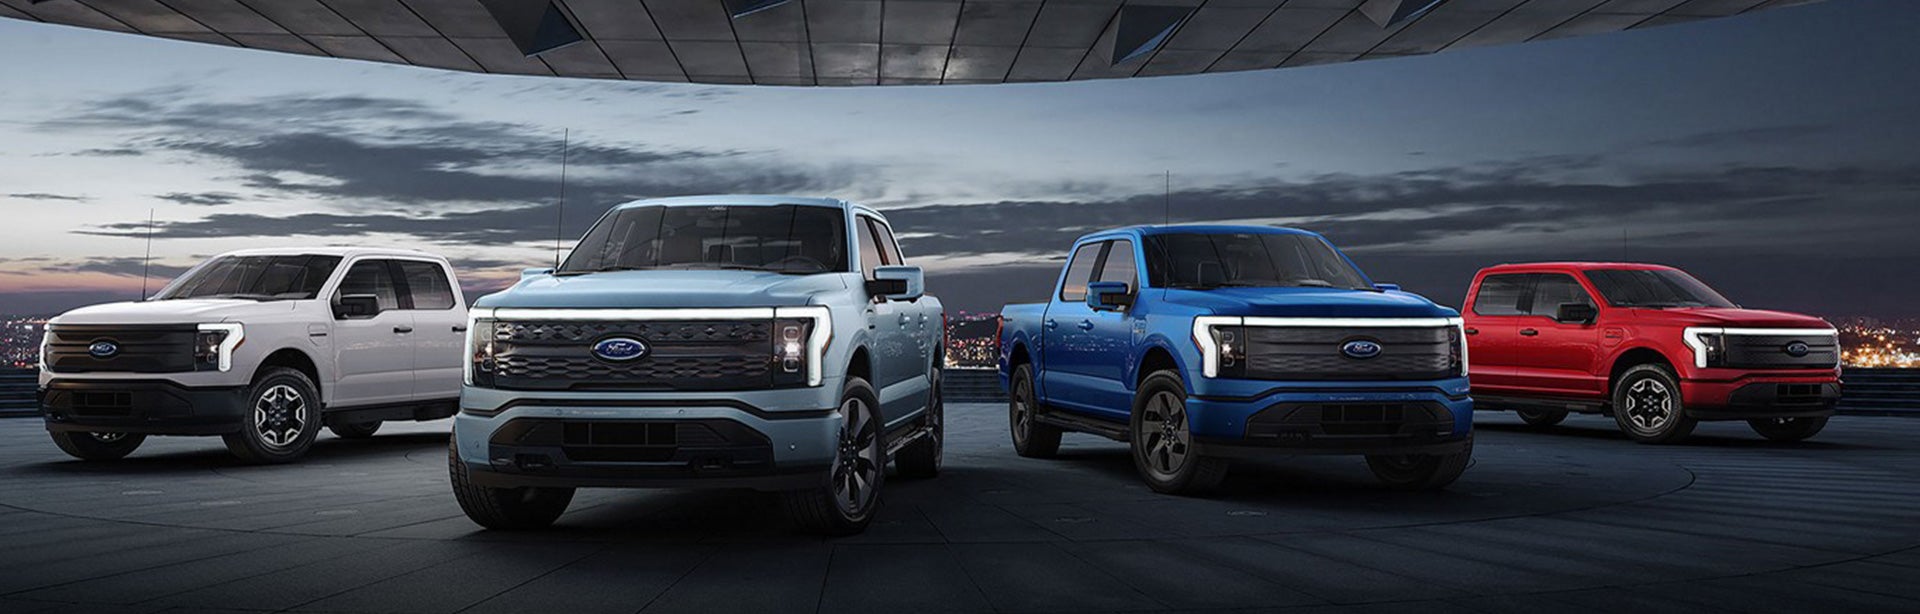 Pre-Order Your 2023 Ford With Prescott Brothers Ford of Rochelle Today